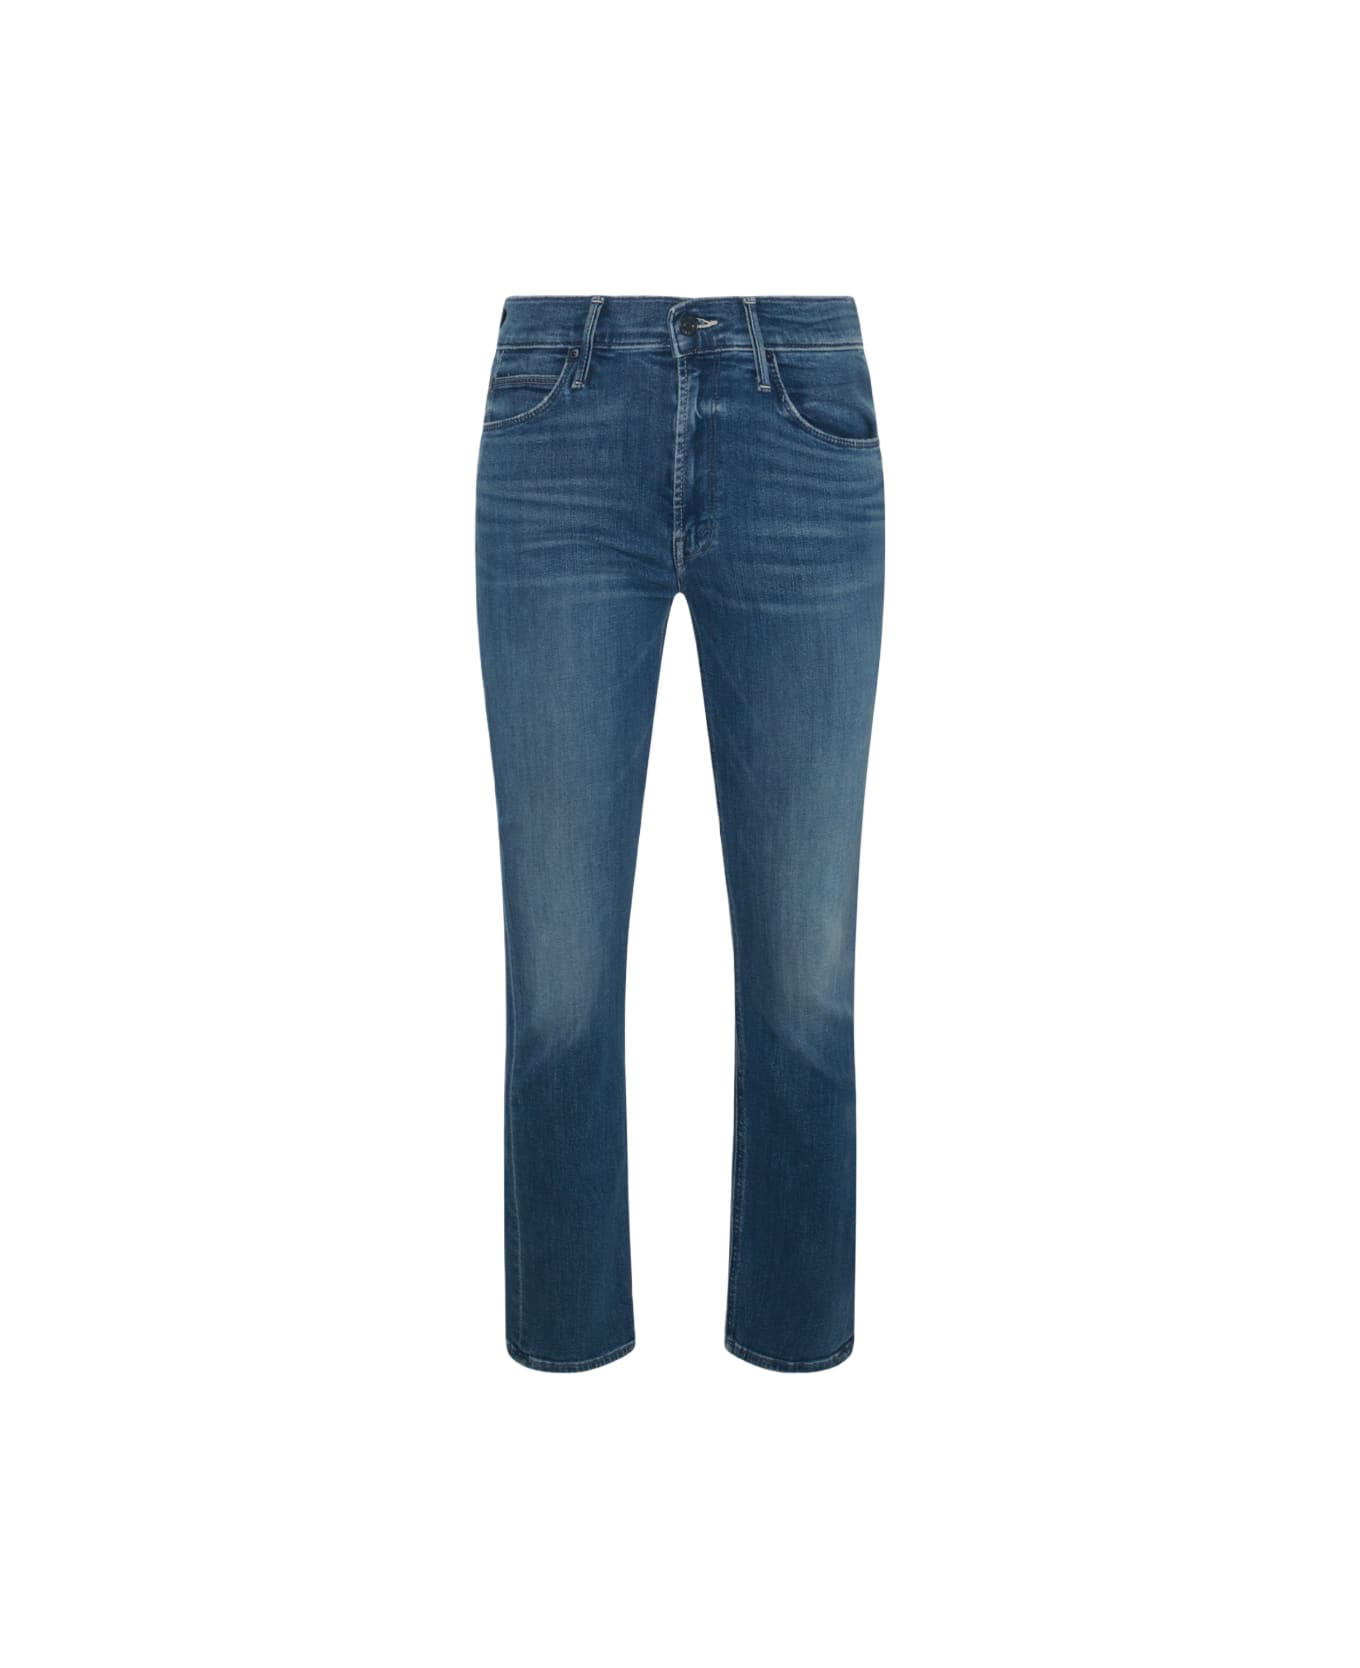 Mother Blue Cotton Denim Jeans - WISH ON A STAR